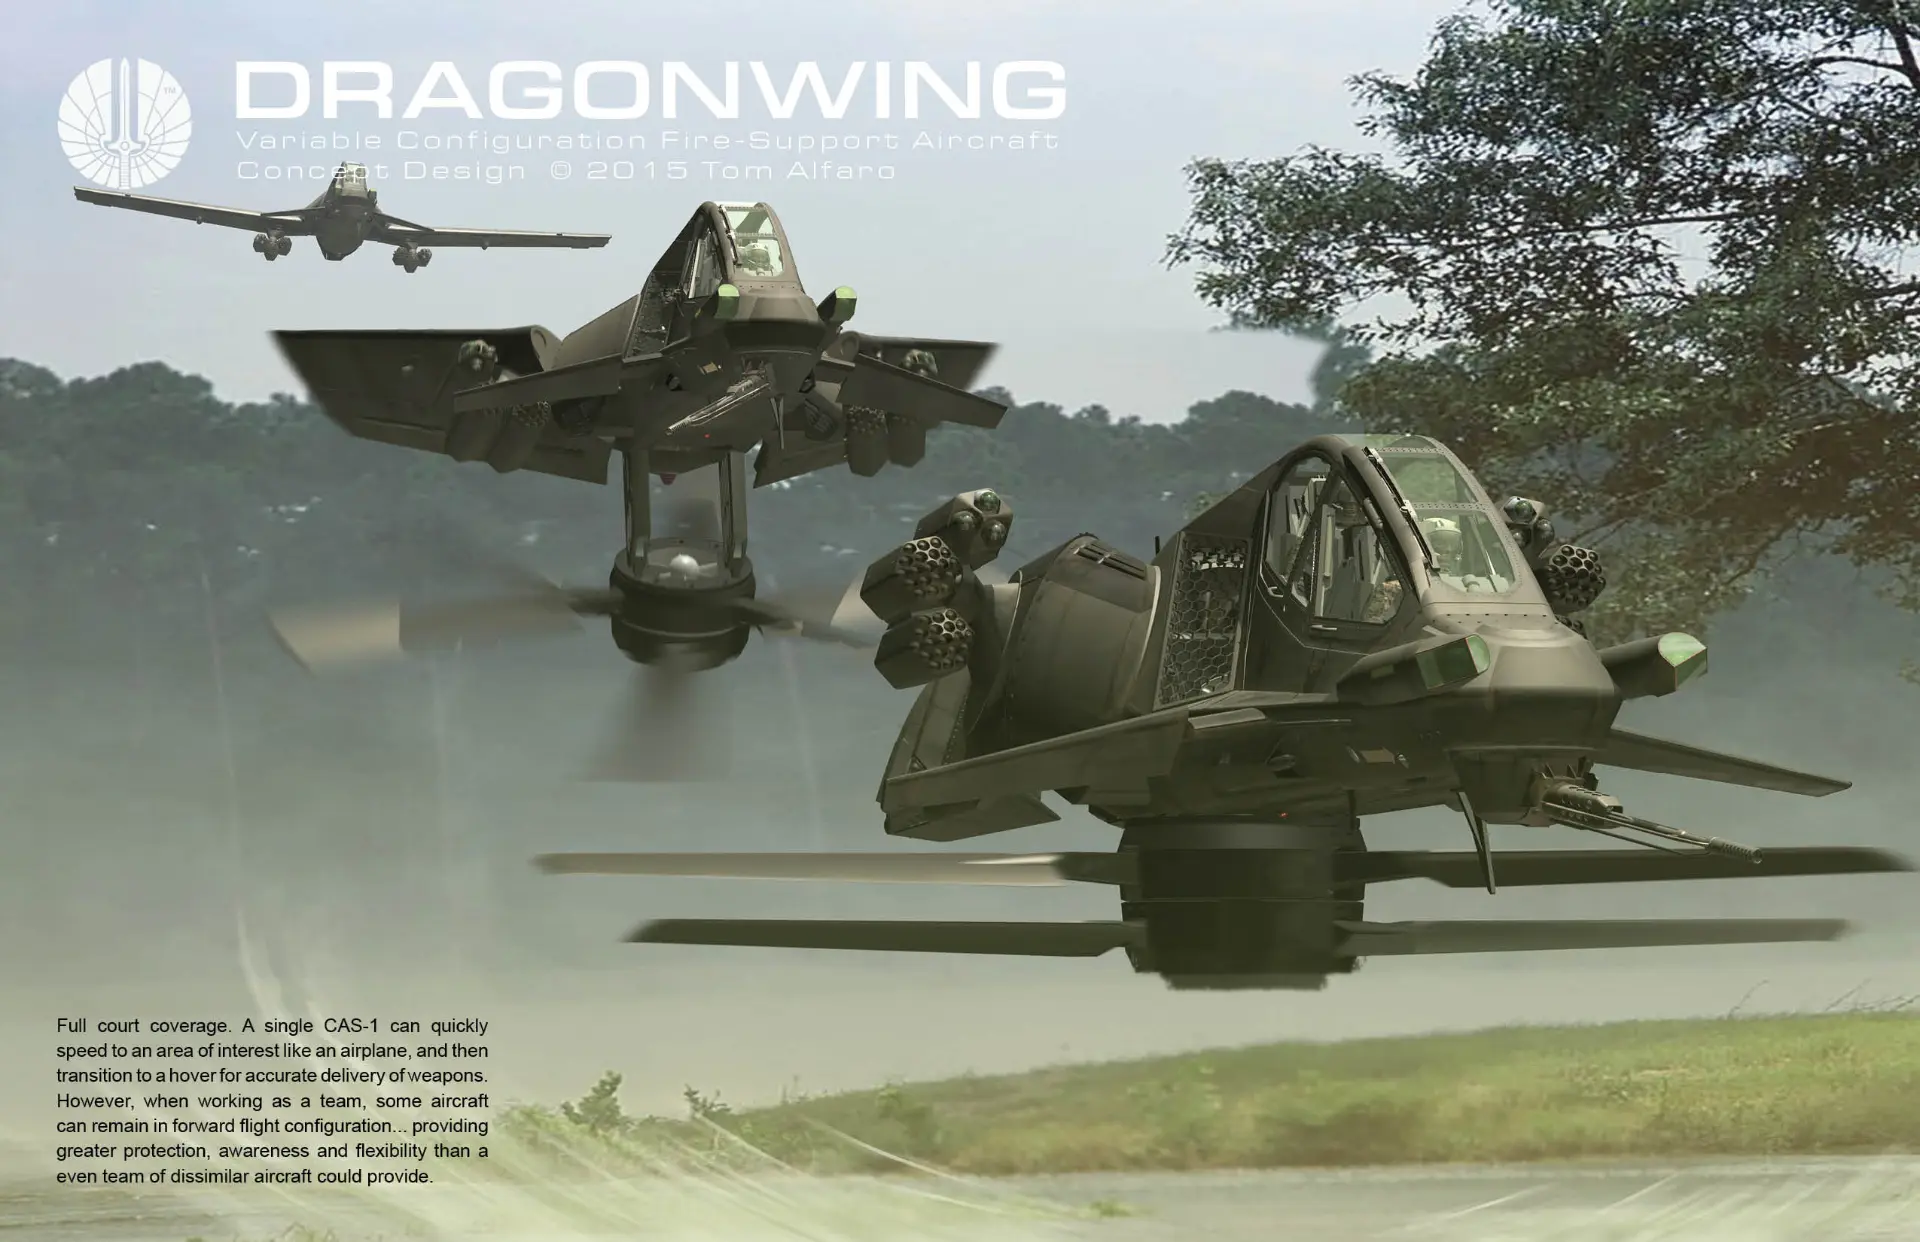 Three Pan Spatial Dragonwing aircraft fly at low altitude over a clearing in wooded terrain. The trailing Dragonwing is in forward flight configuration with rotors retracted and wings deployed; the middle aircraft is in transition, wings half folded and rotors deploying underneath; and the aircraft in the foreground is in full rotorcraft configuration.